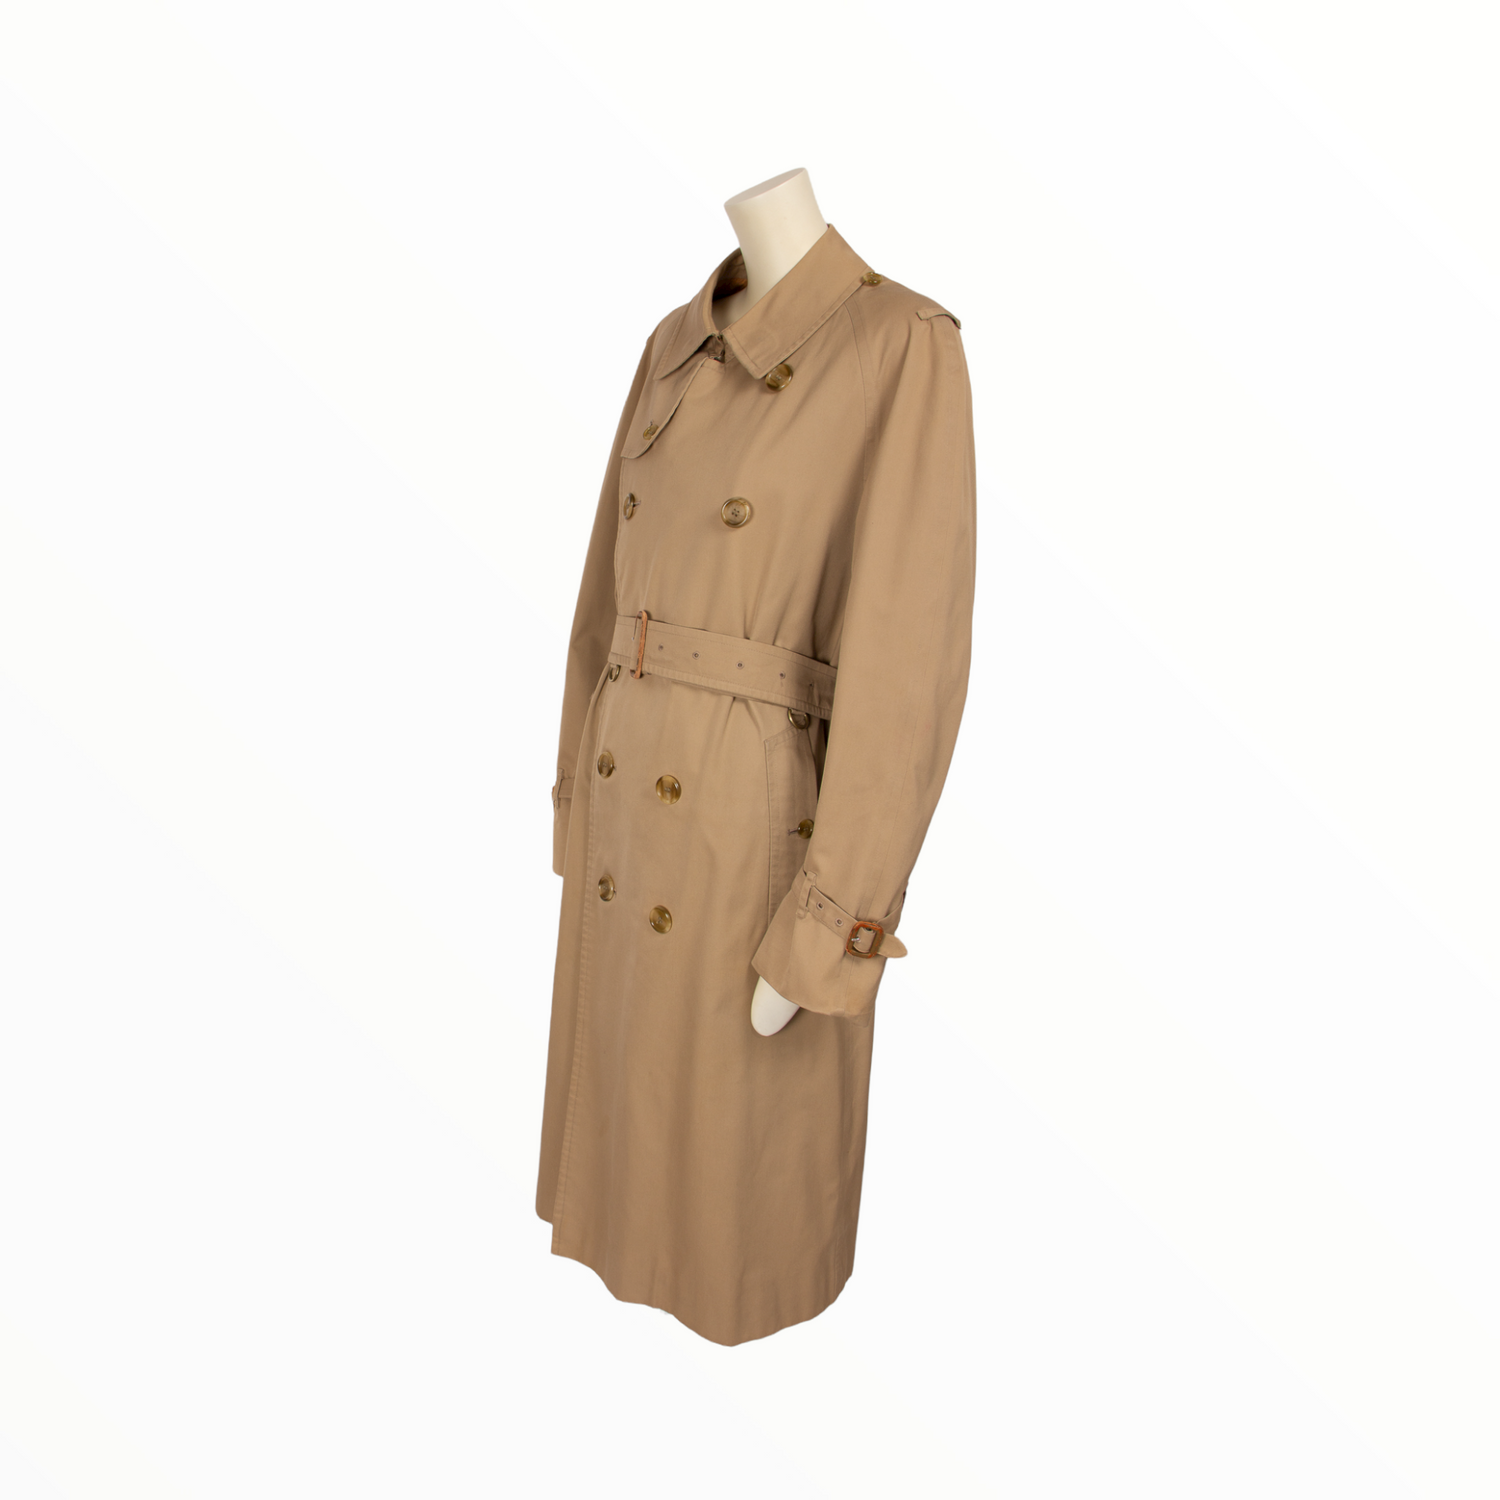 Burberry Classic vintage Trench Coat - M - 1980s secondhand Lysis